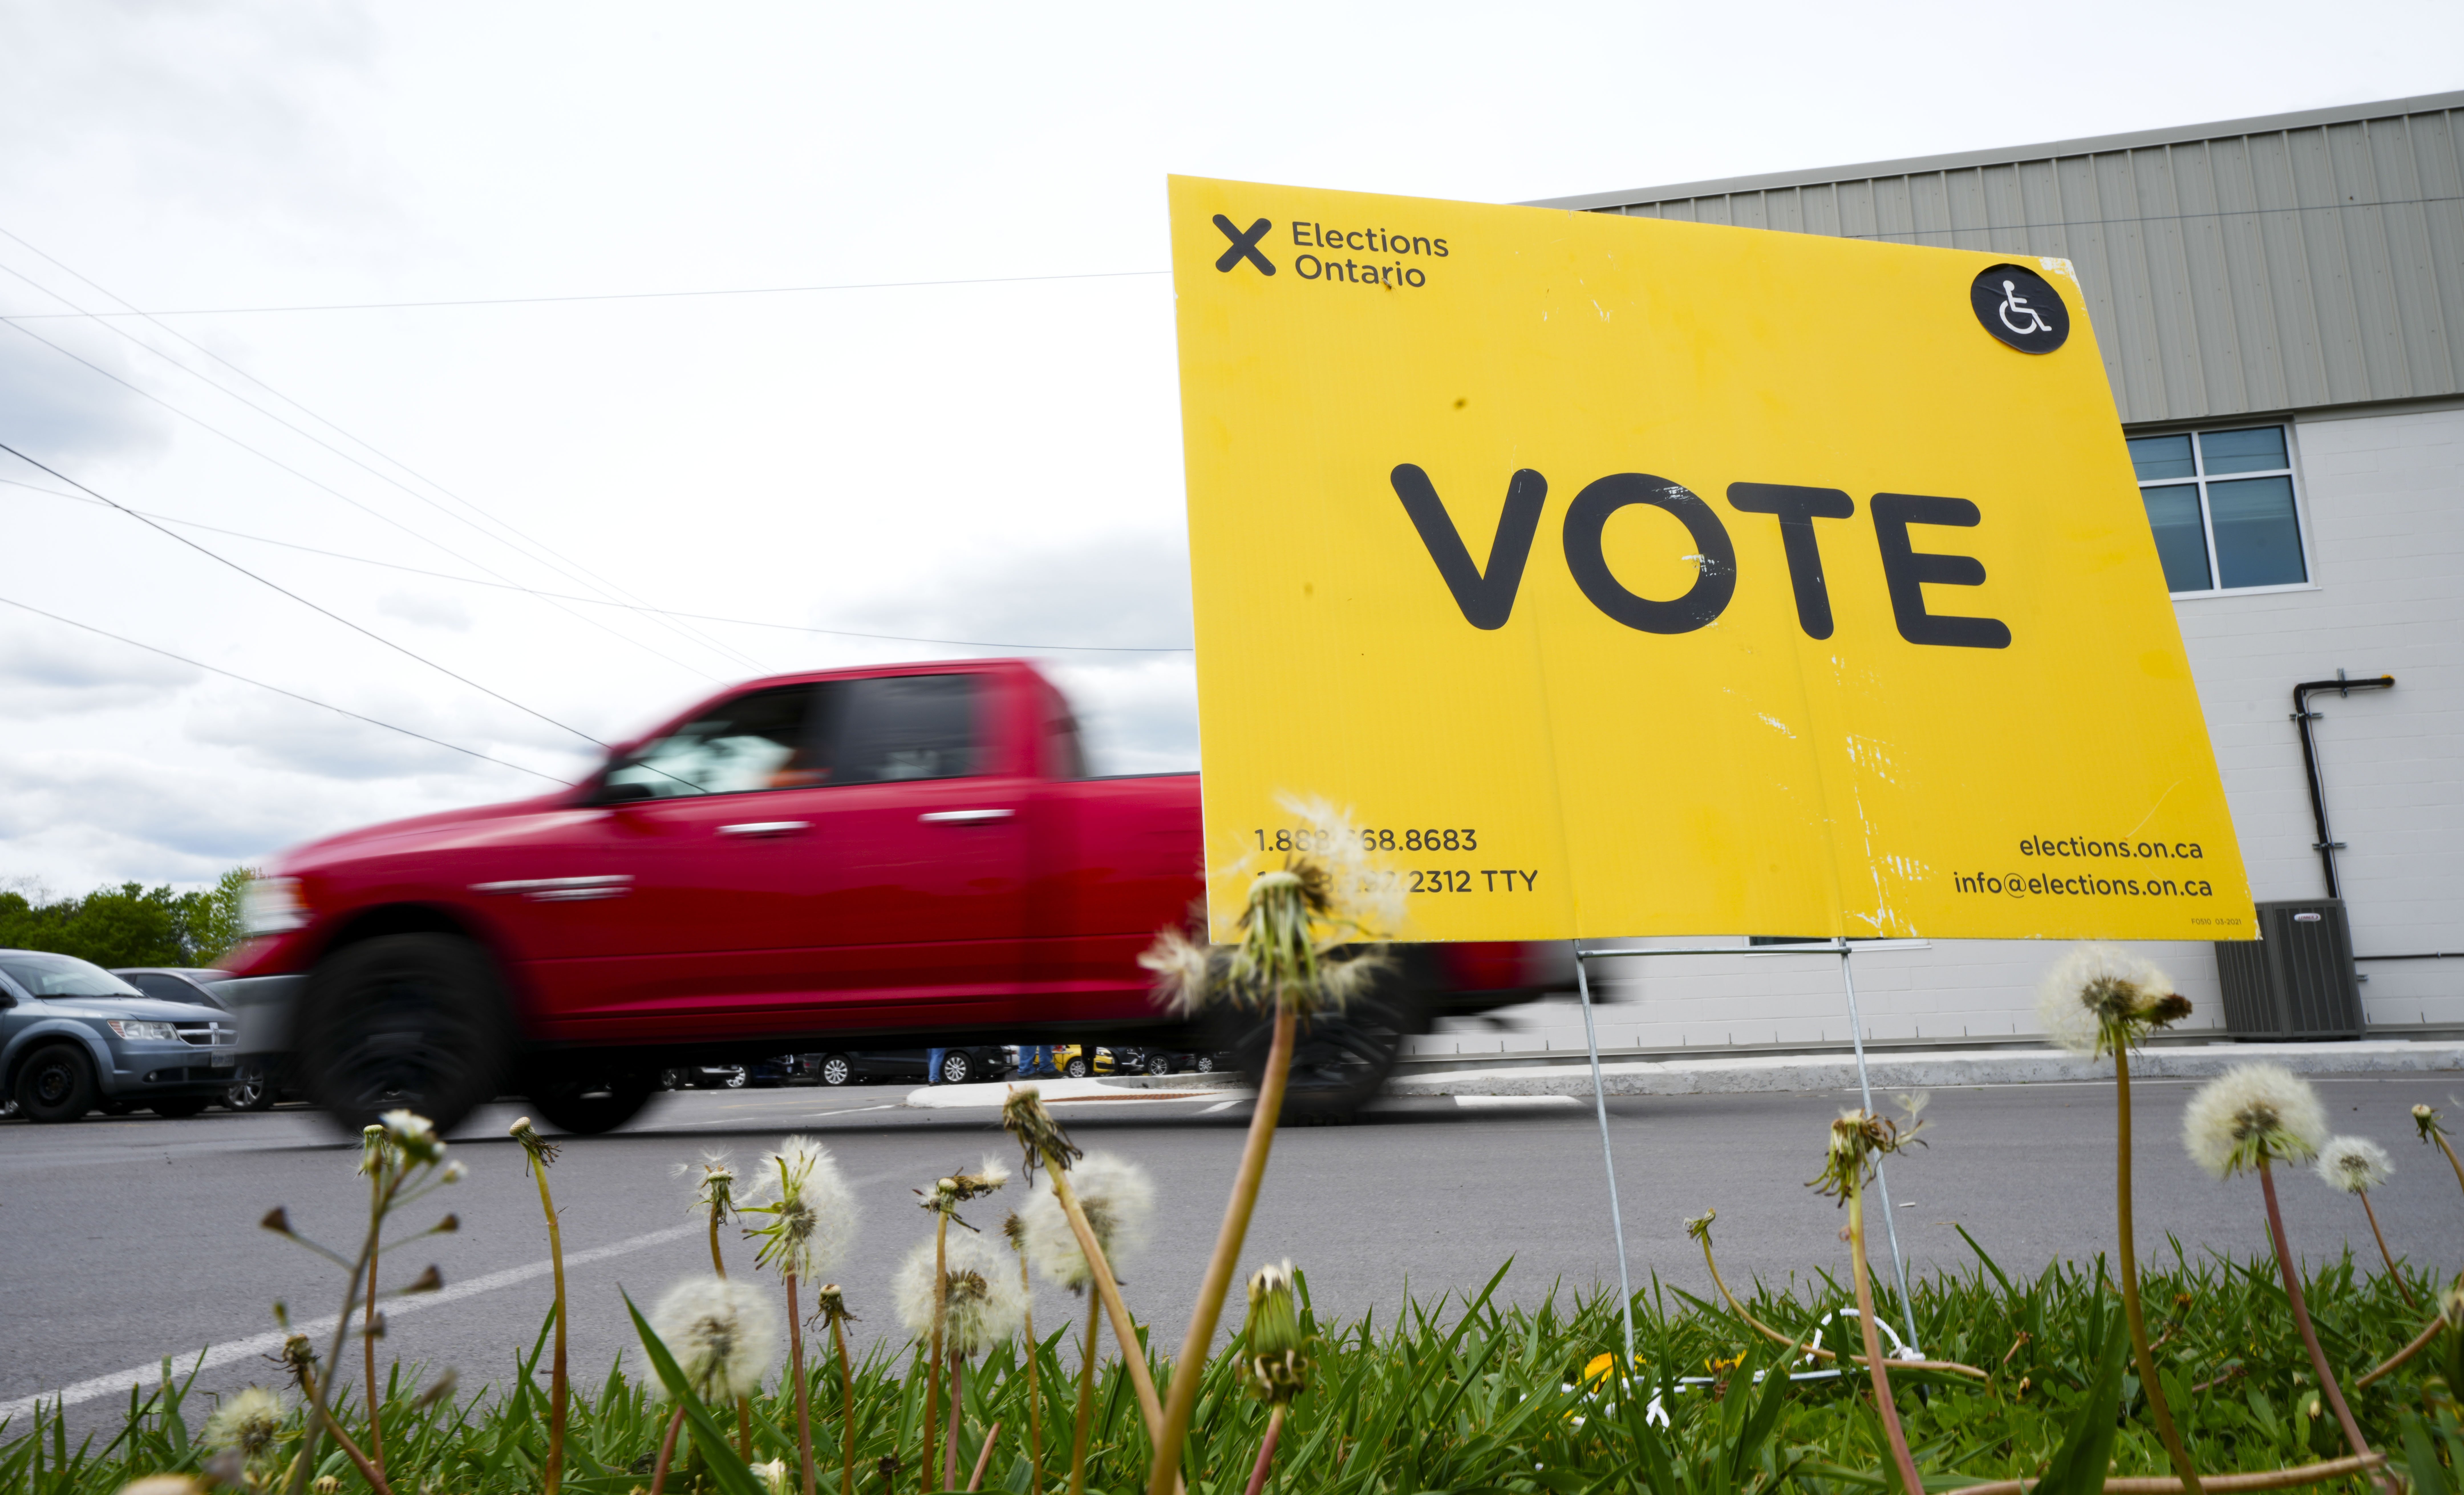 Advanced voting doesn’t strongly favour any party: Mainstreet poll